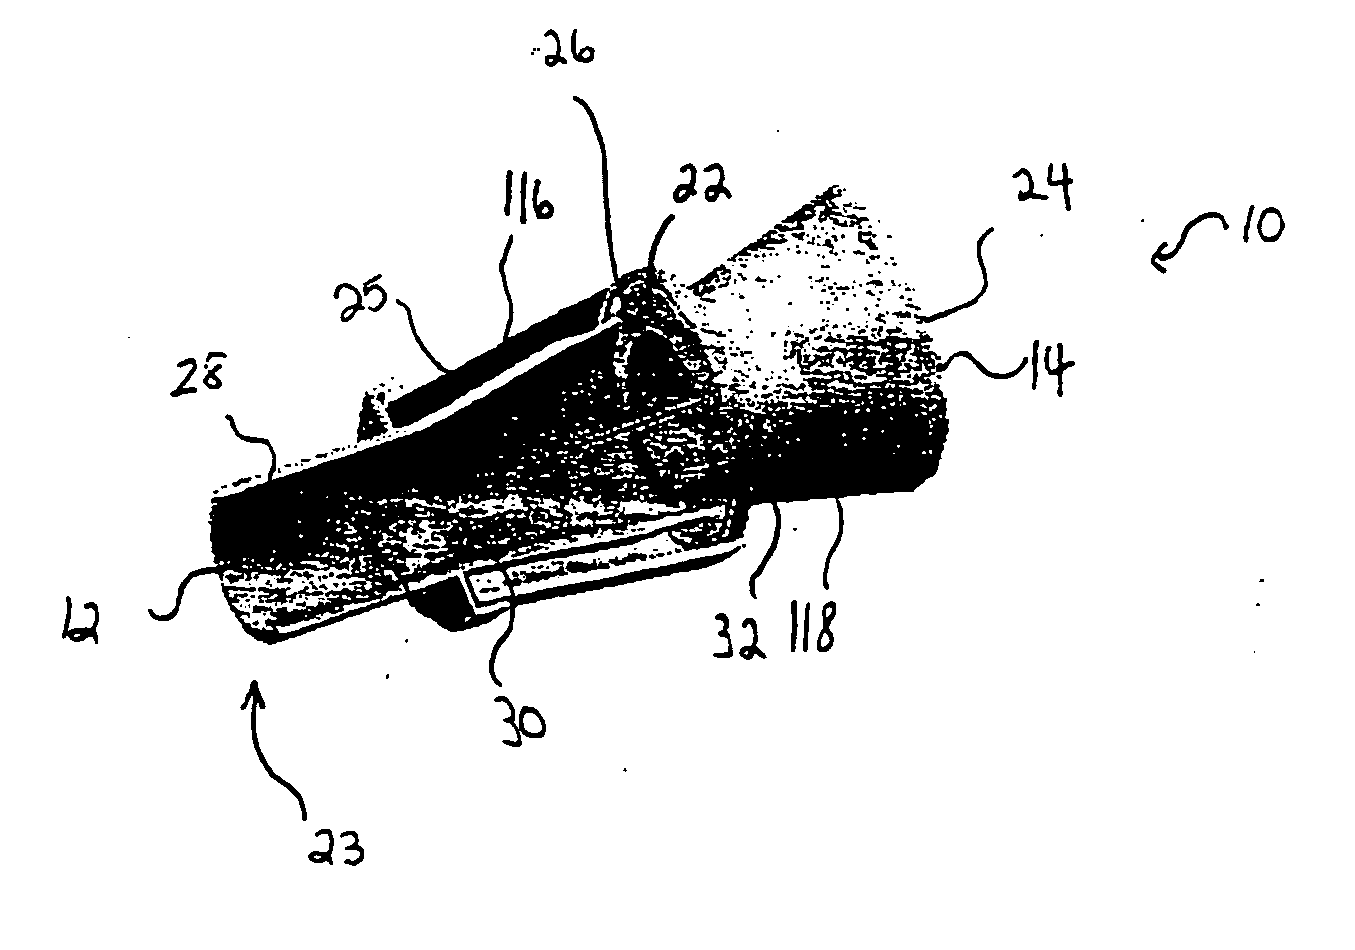 Spacer for delivery of medications from an inhaler to children and breathing impaired patients